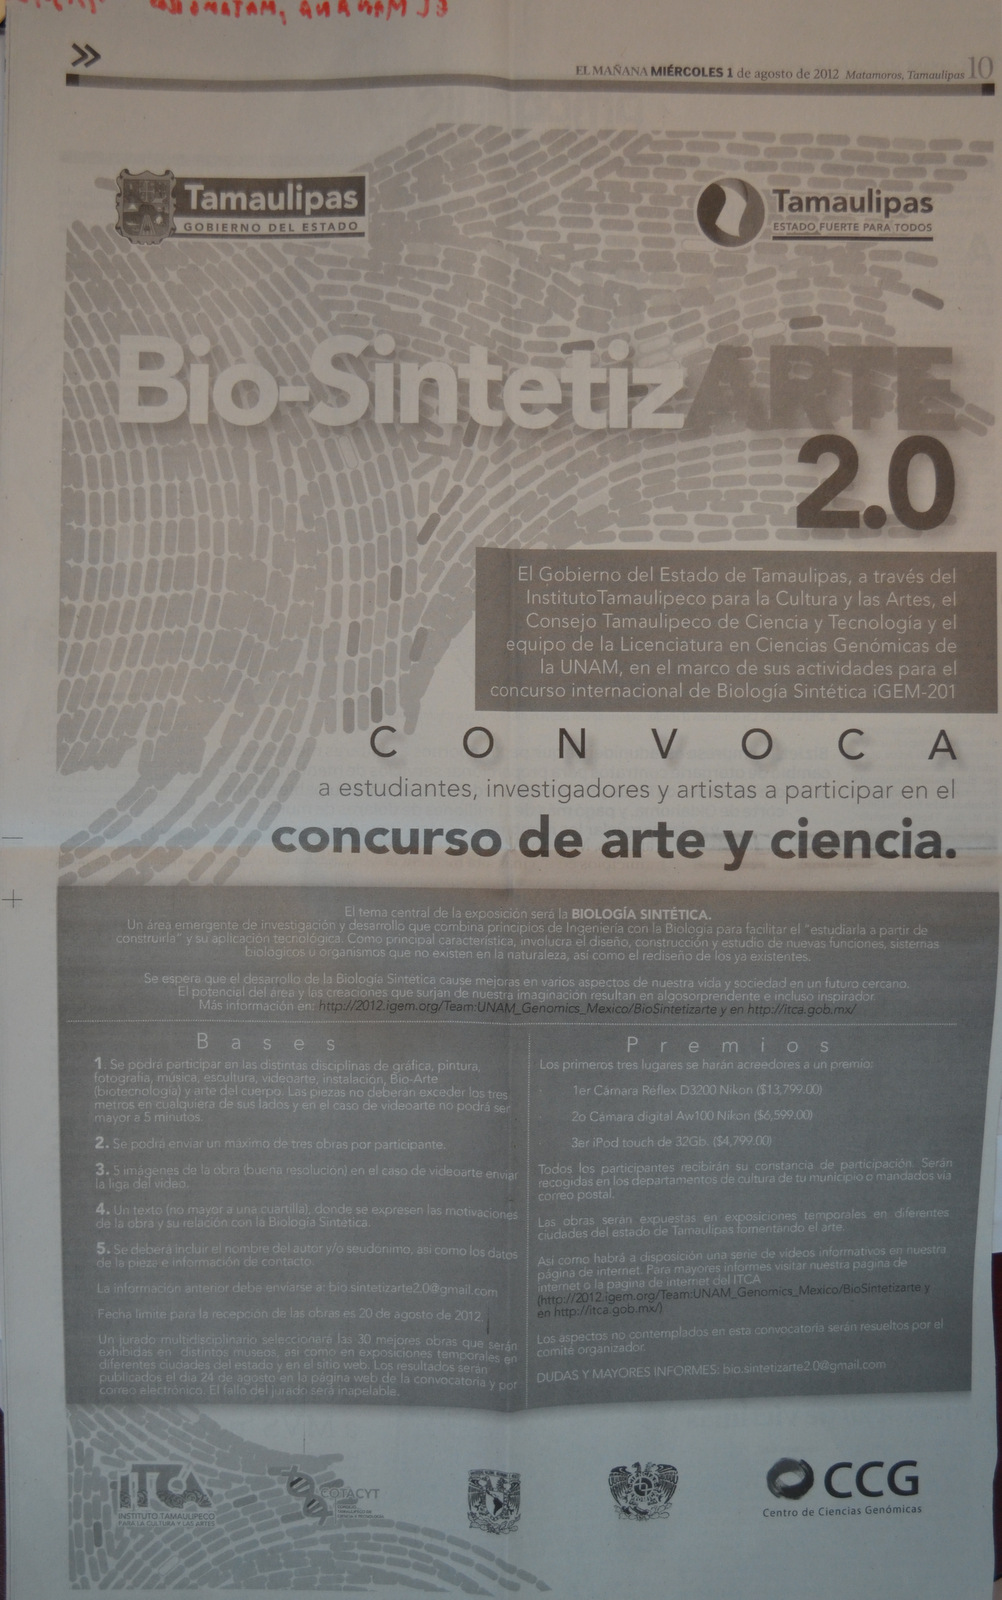 Newspaper "El Manana" published 1 august 2012 visible in all Mexico